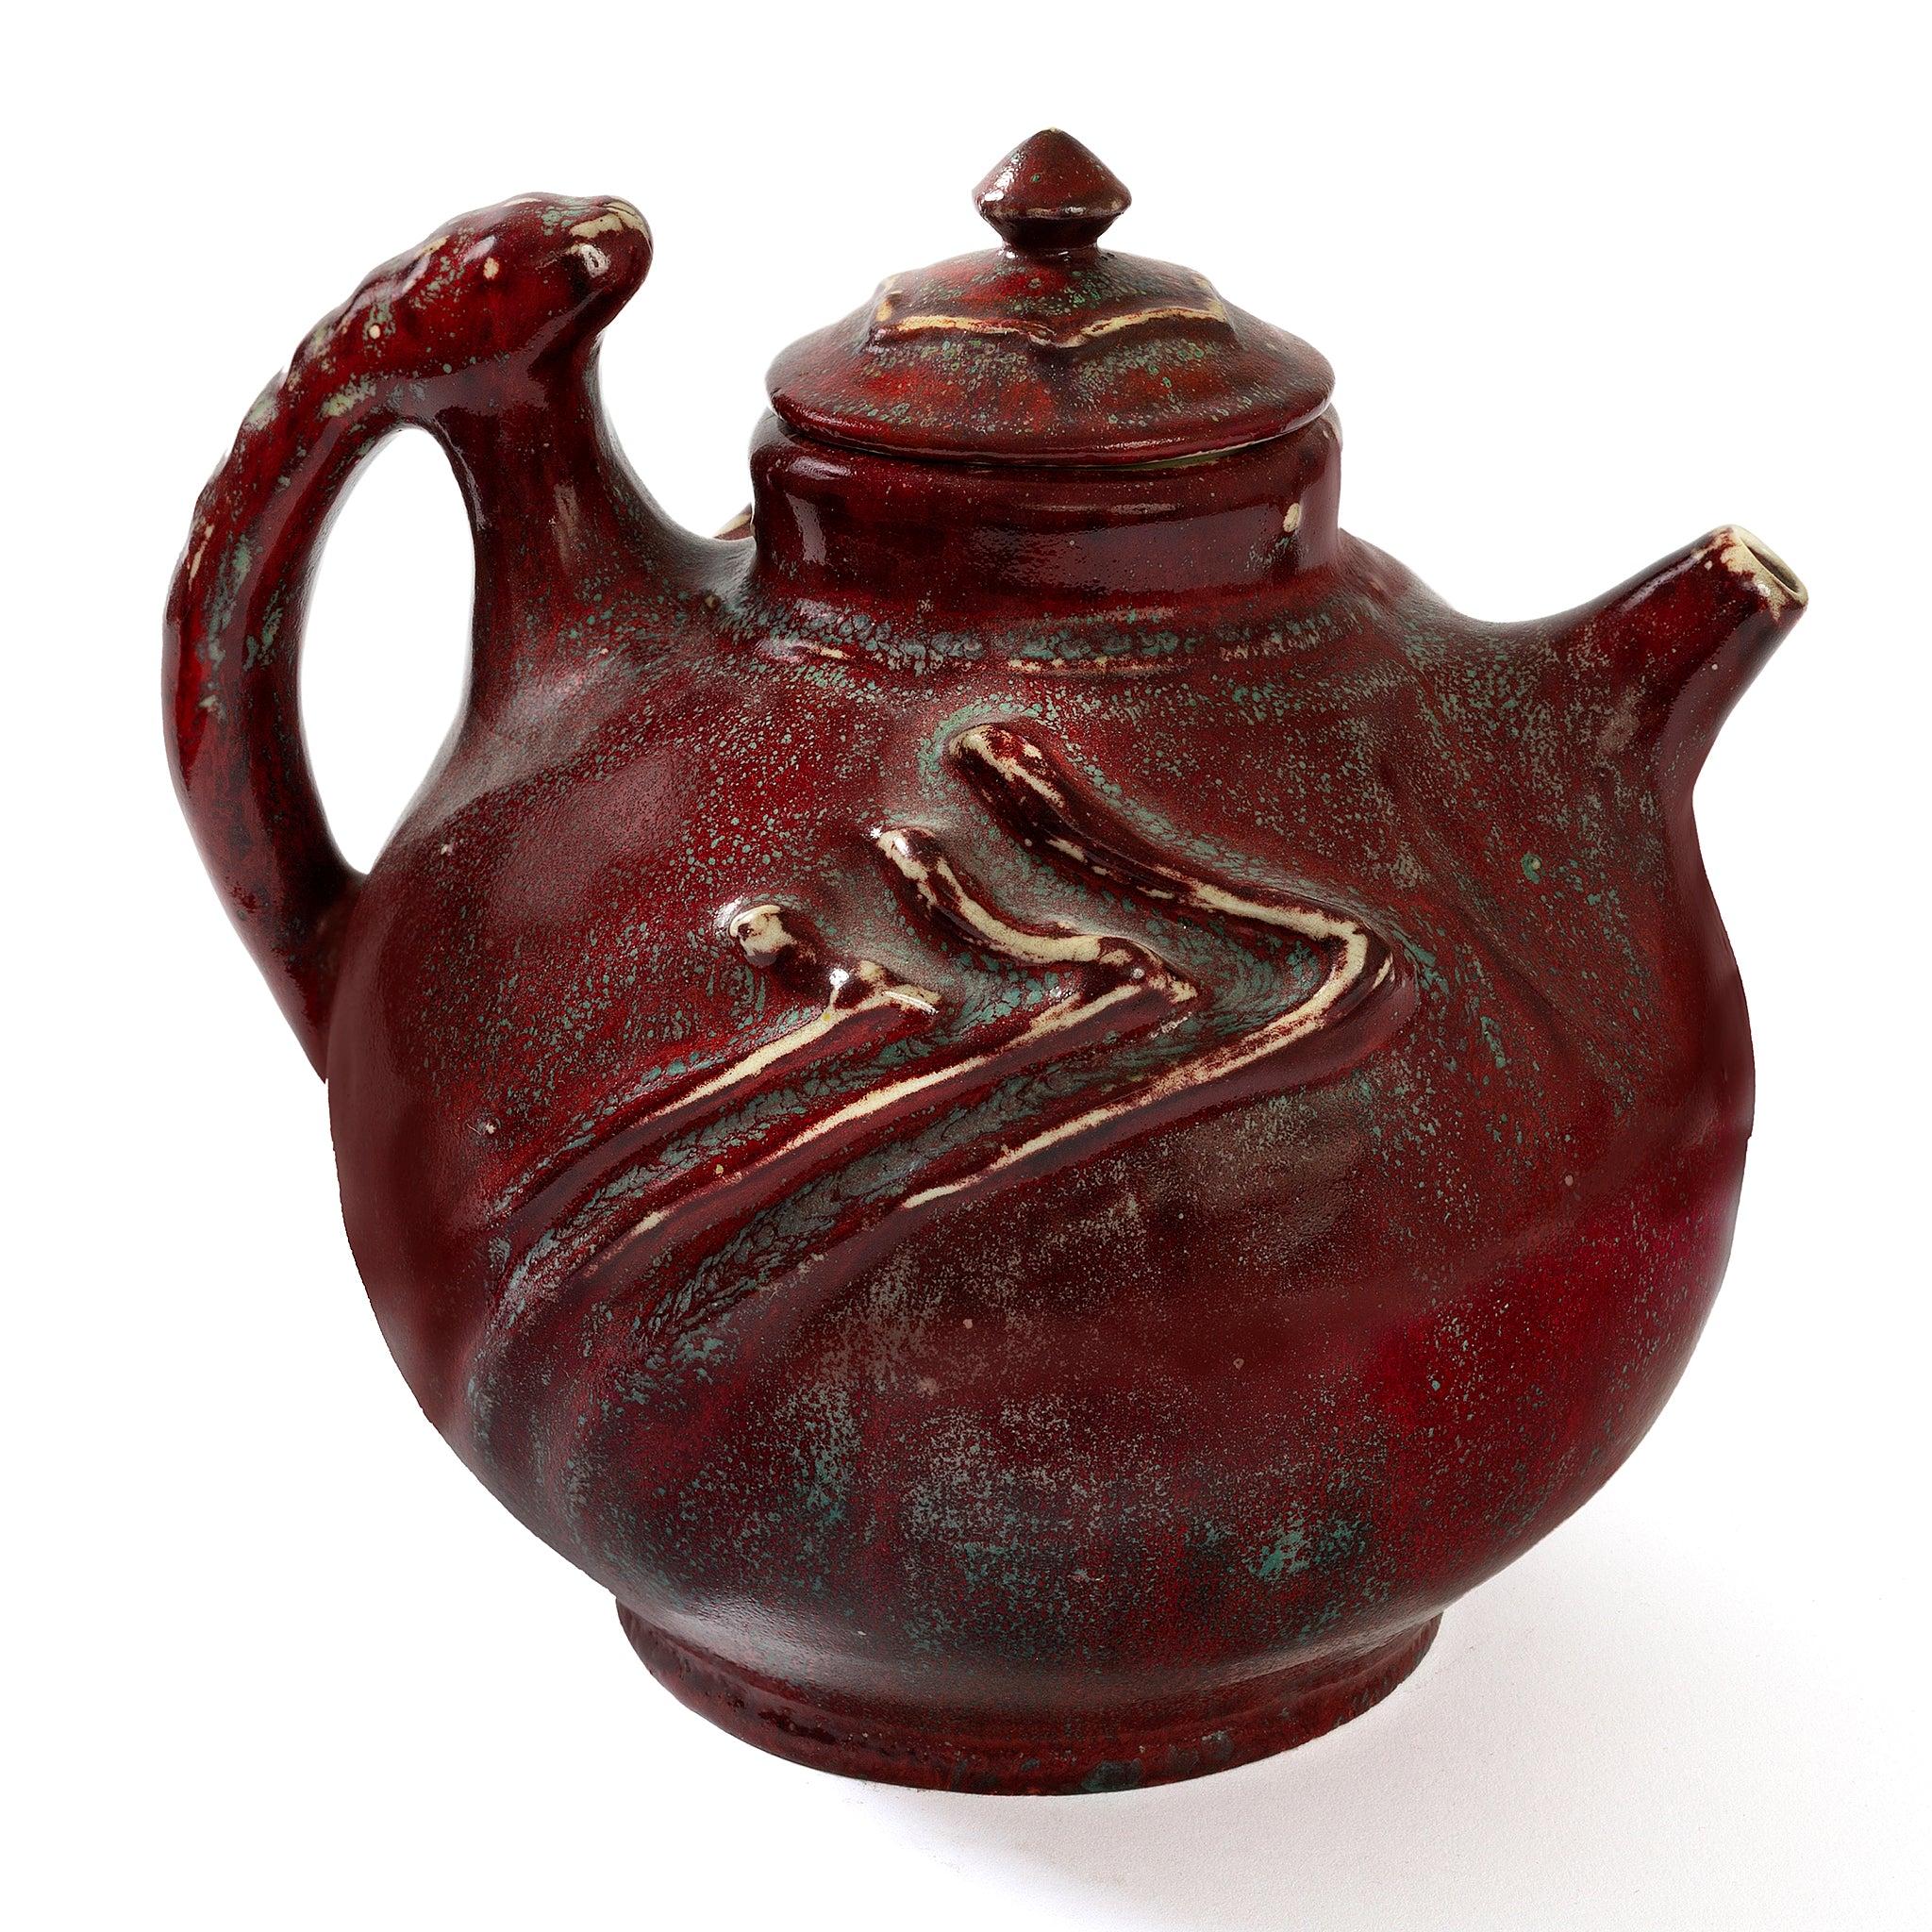 A ceramic lidded teapot by Pierre-Adrien Dalpayrat featuring a spherical body decorated with dynamic sculptural ribs, an inventive crescent-shaped handle, a saucy spout, and a particularly rich burgundy example of Dalpayrat’s signature glaze. Relief